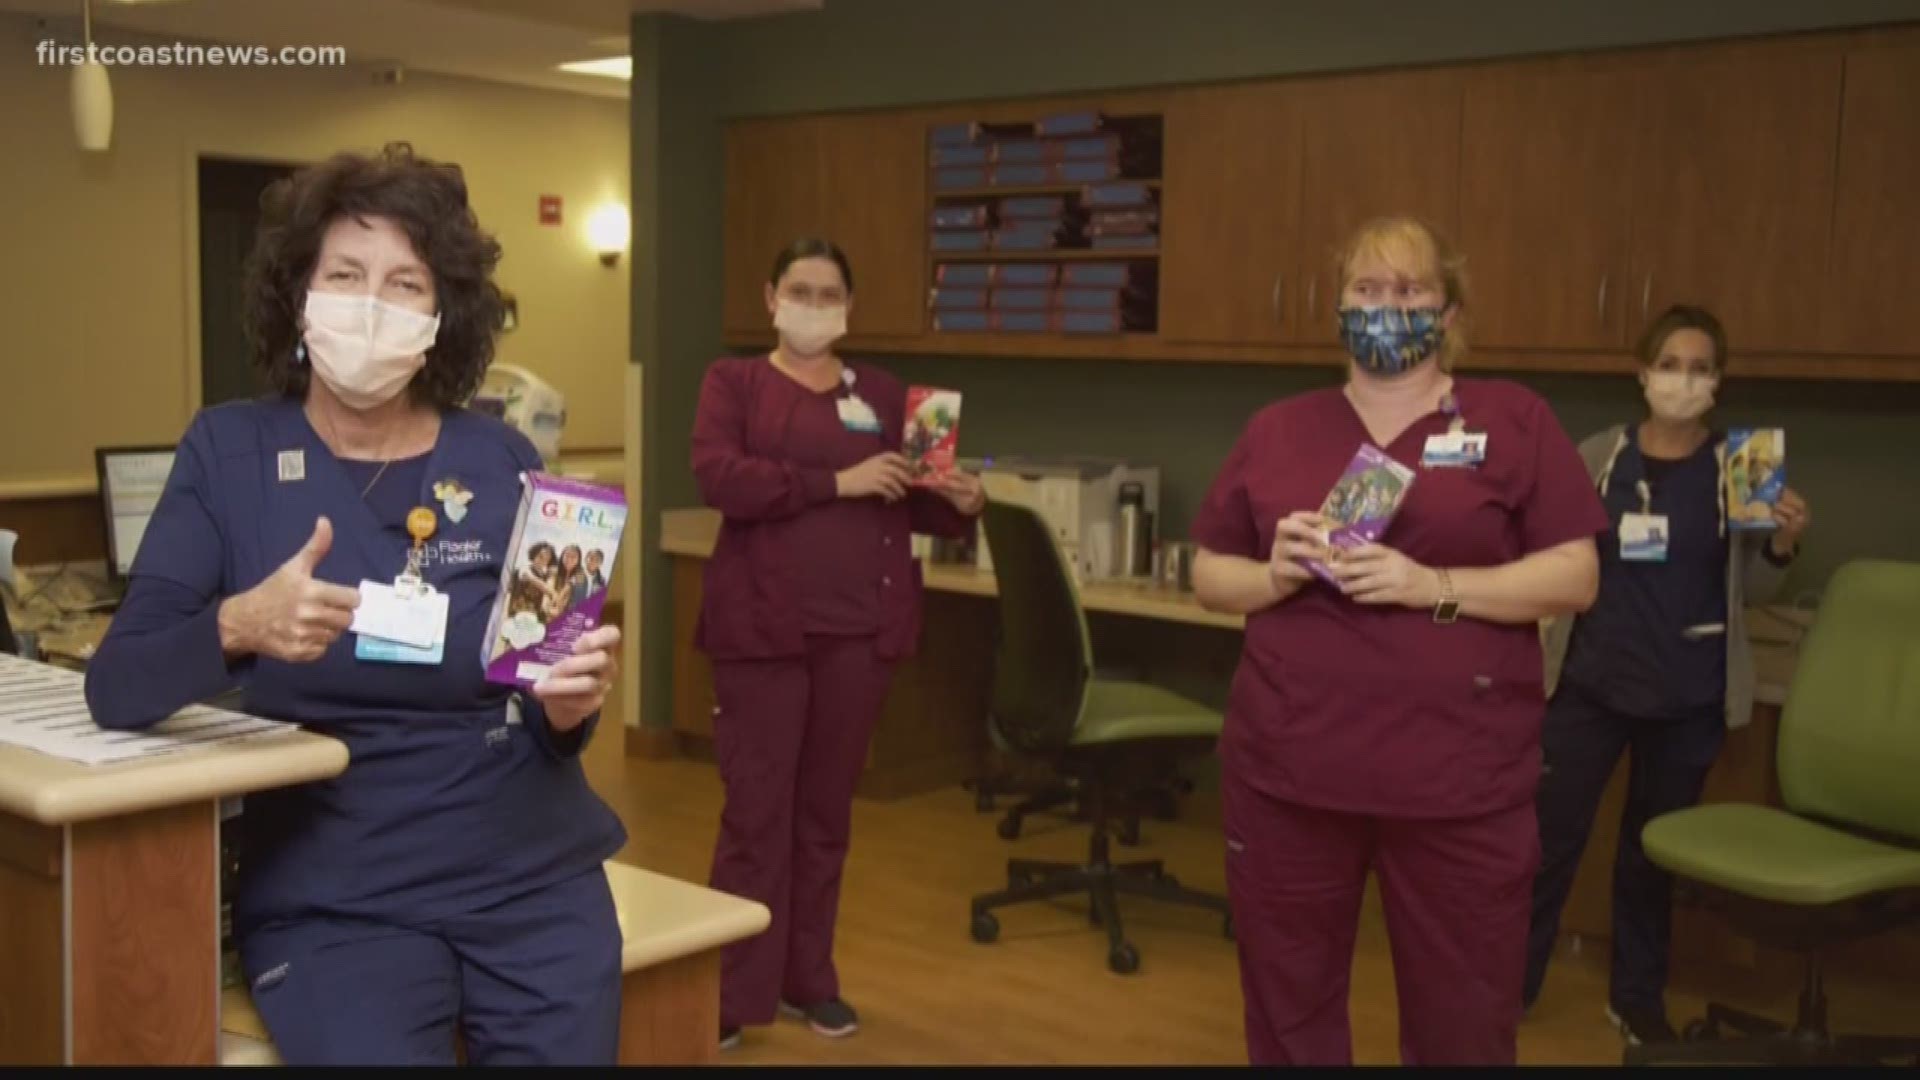 "To hear that the Girl Scouts thought about our healthcare workers, our front line workers and wanted to do something to lift spirits, I was just overwhelmed."